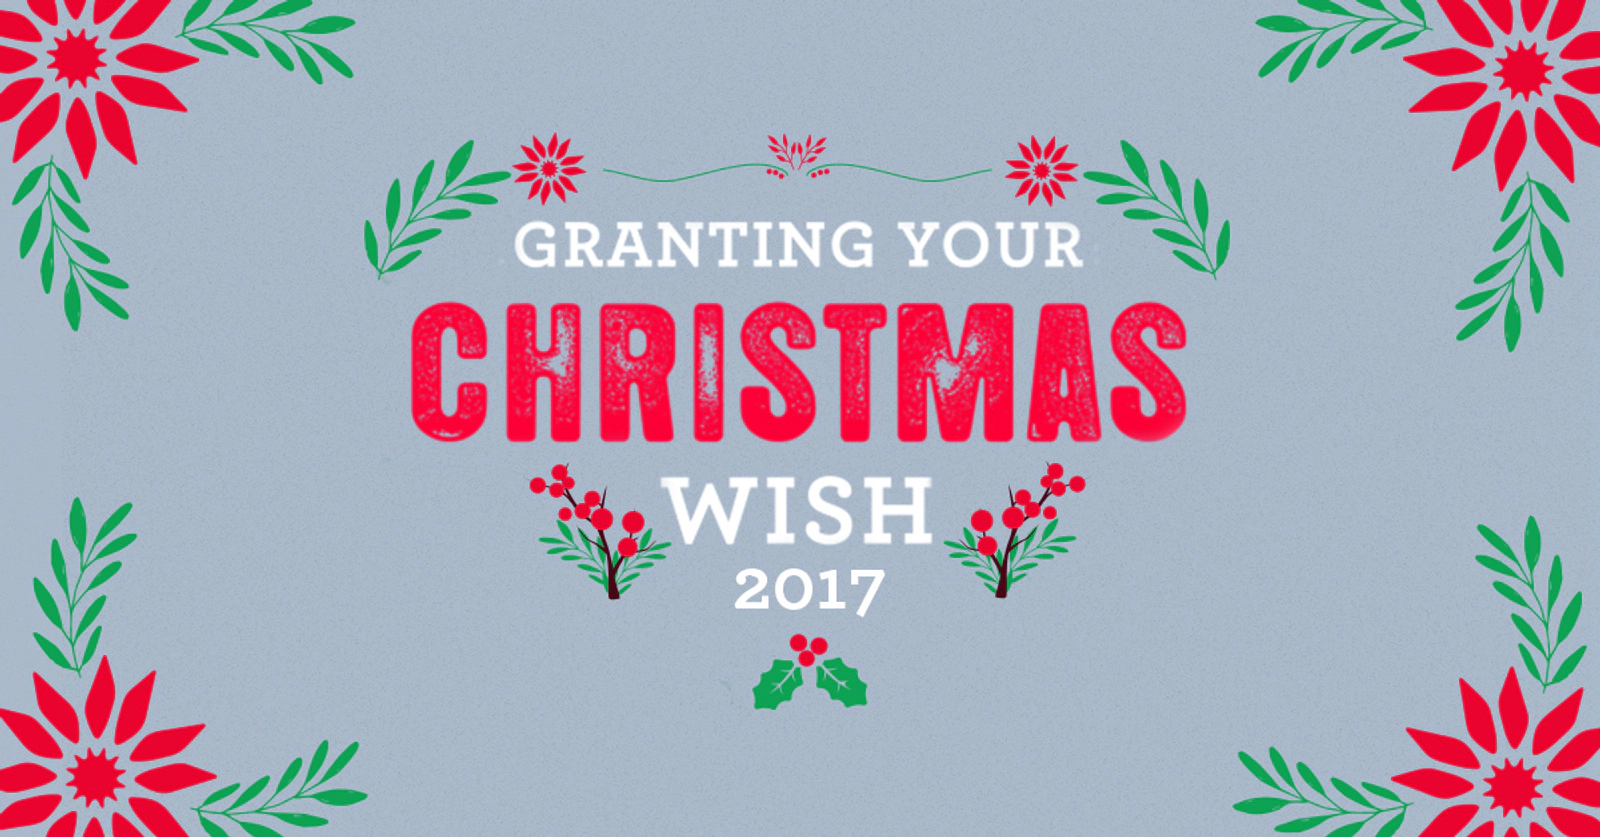 Let iHeartRadio Grant Your Christmas Wish!